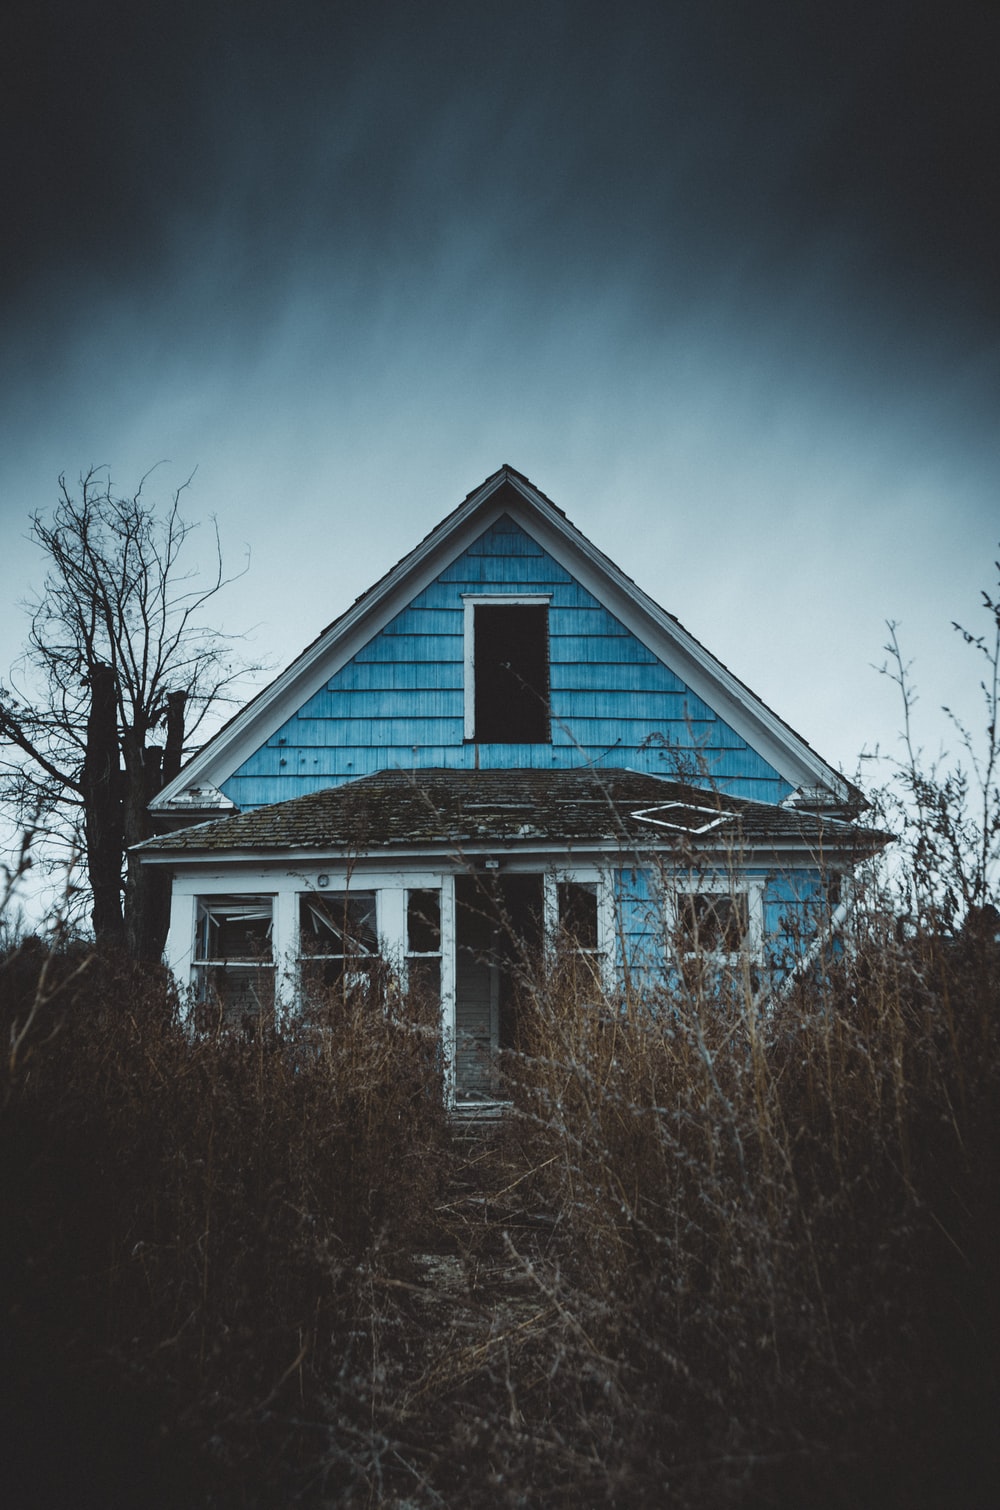 Abandoned House Picture. Download Free Image